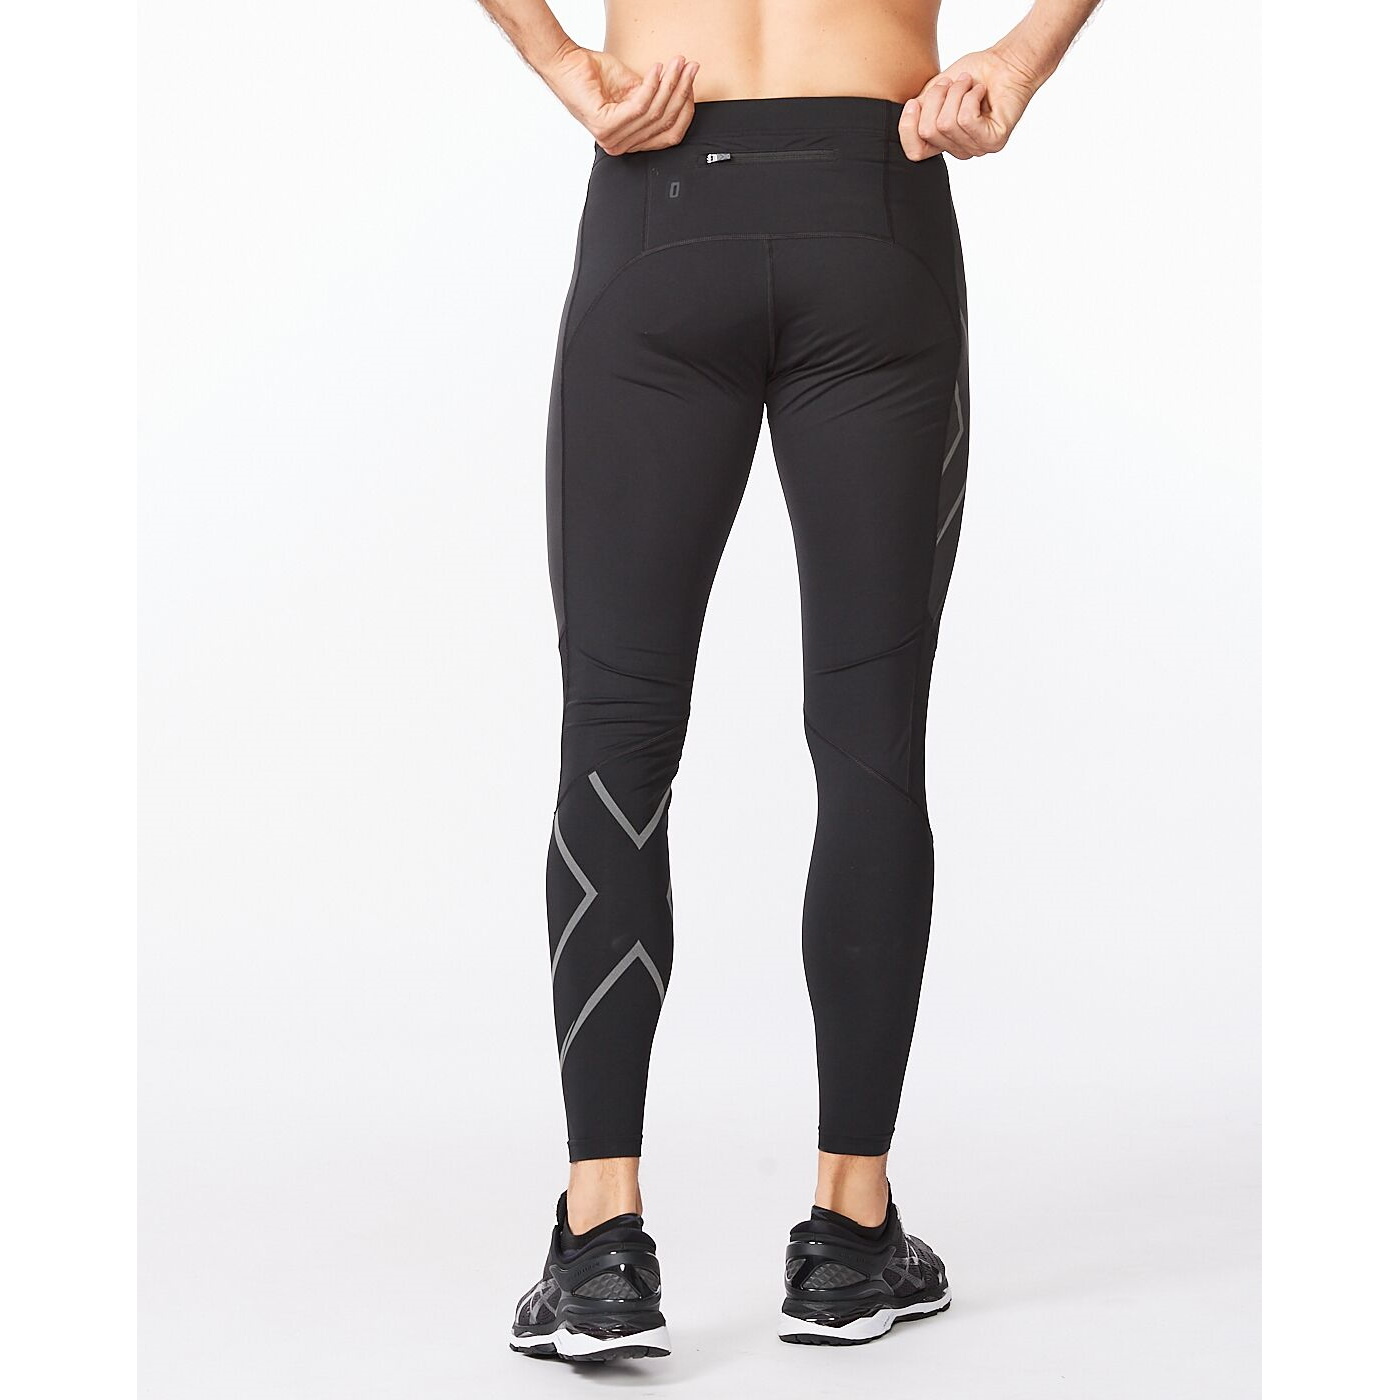 2XU Ignition Mid-Rise Compression Tights for women